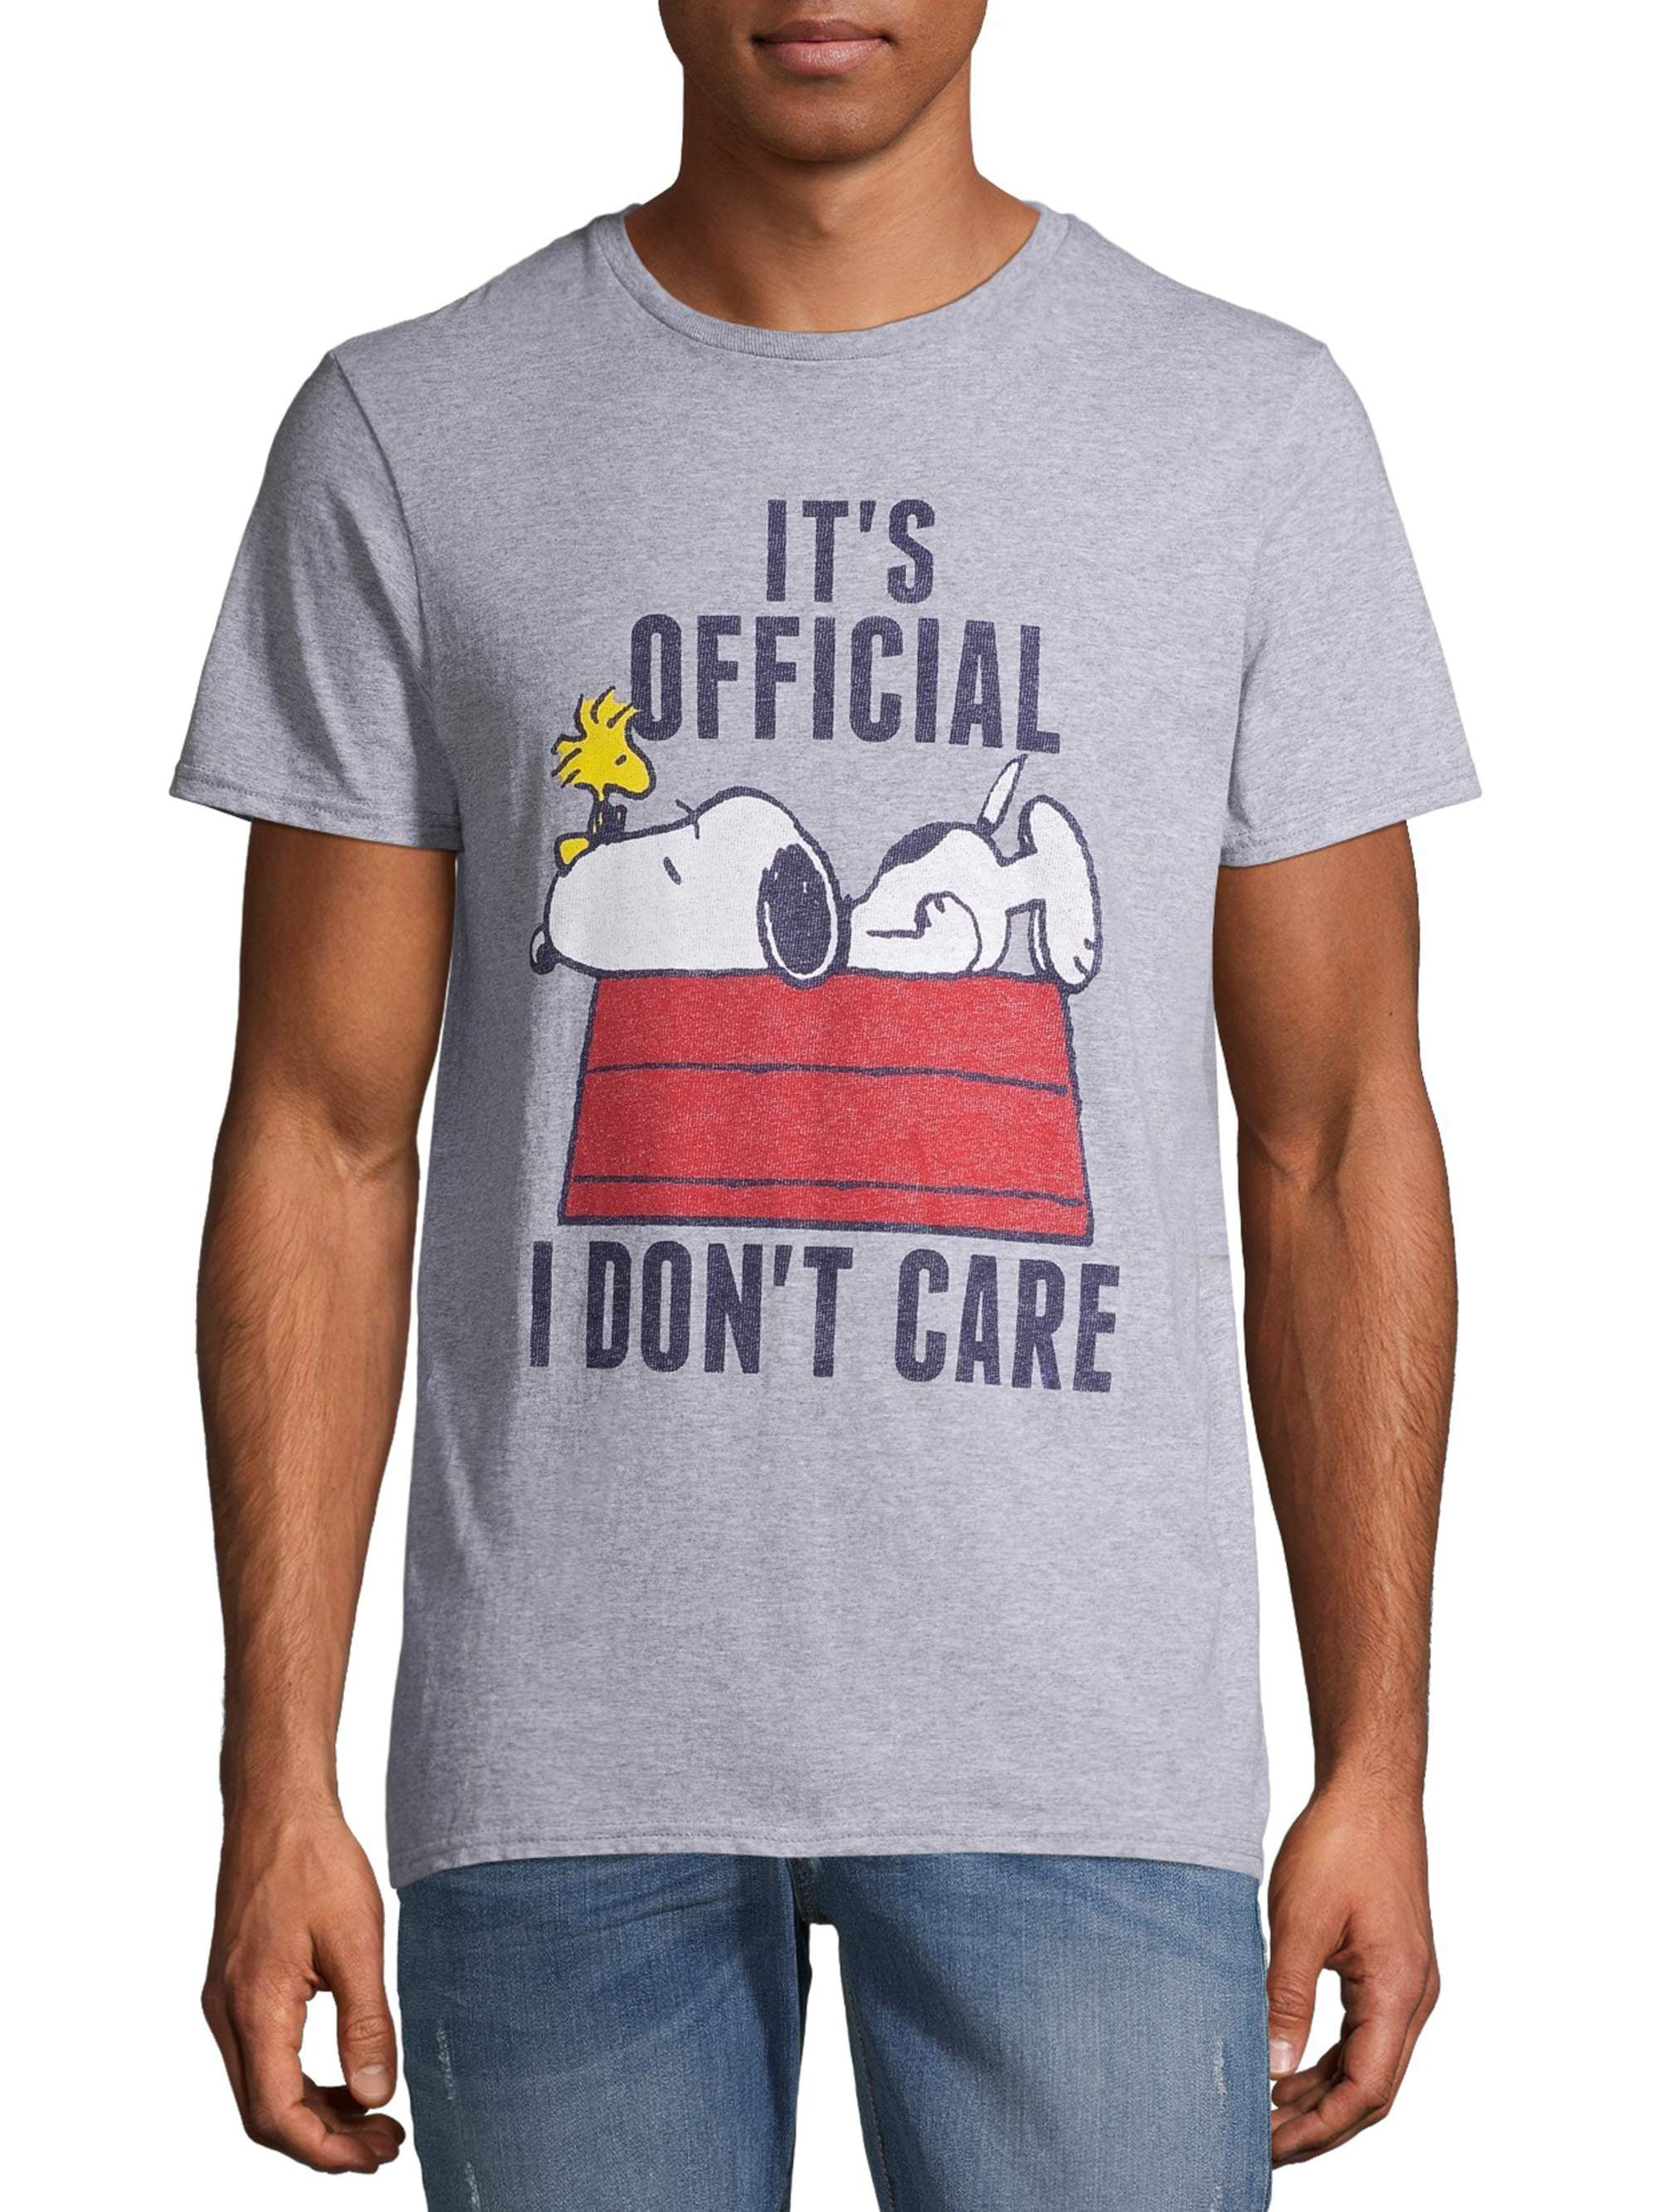 Snoopy Peanuts I Don't Care Men's and Big Men's Graphic T-shirt